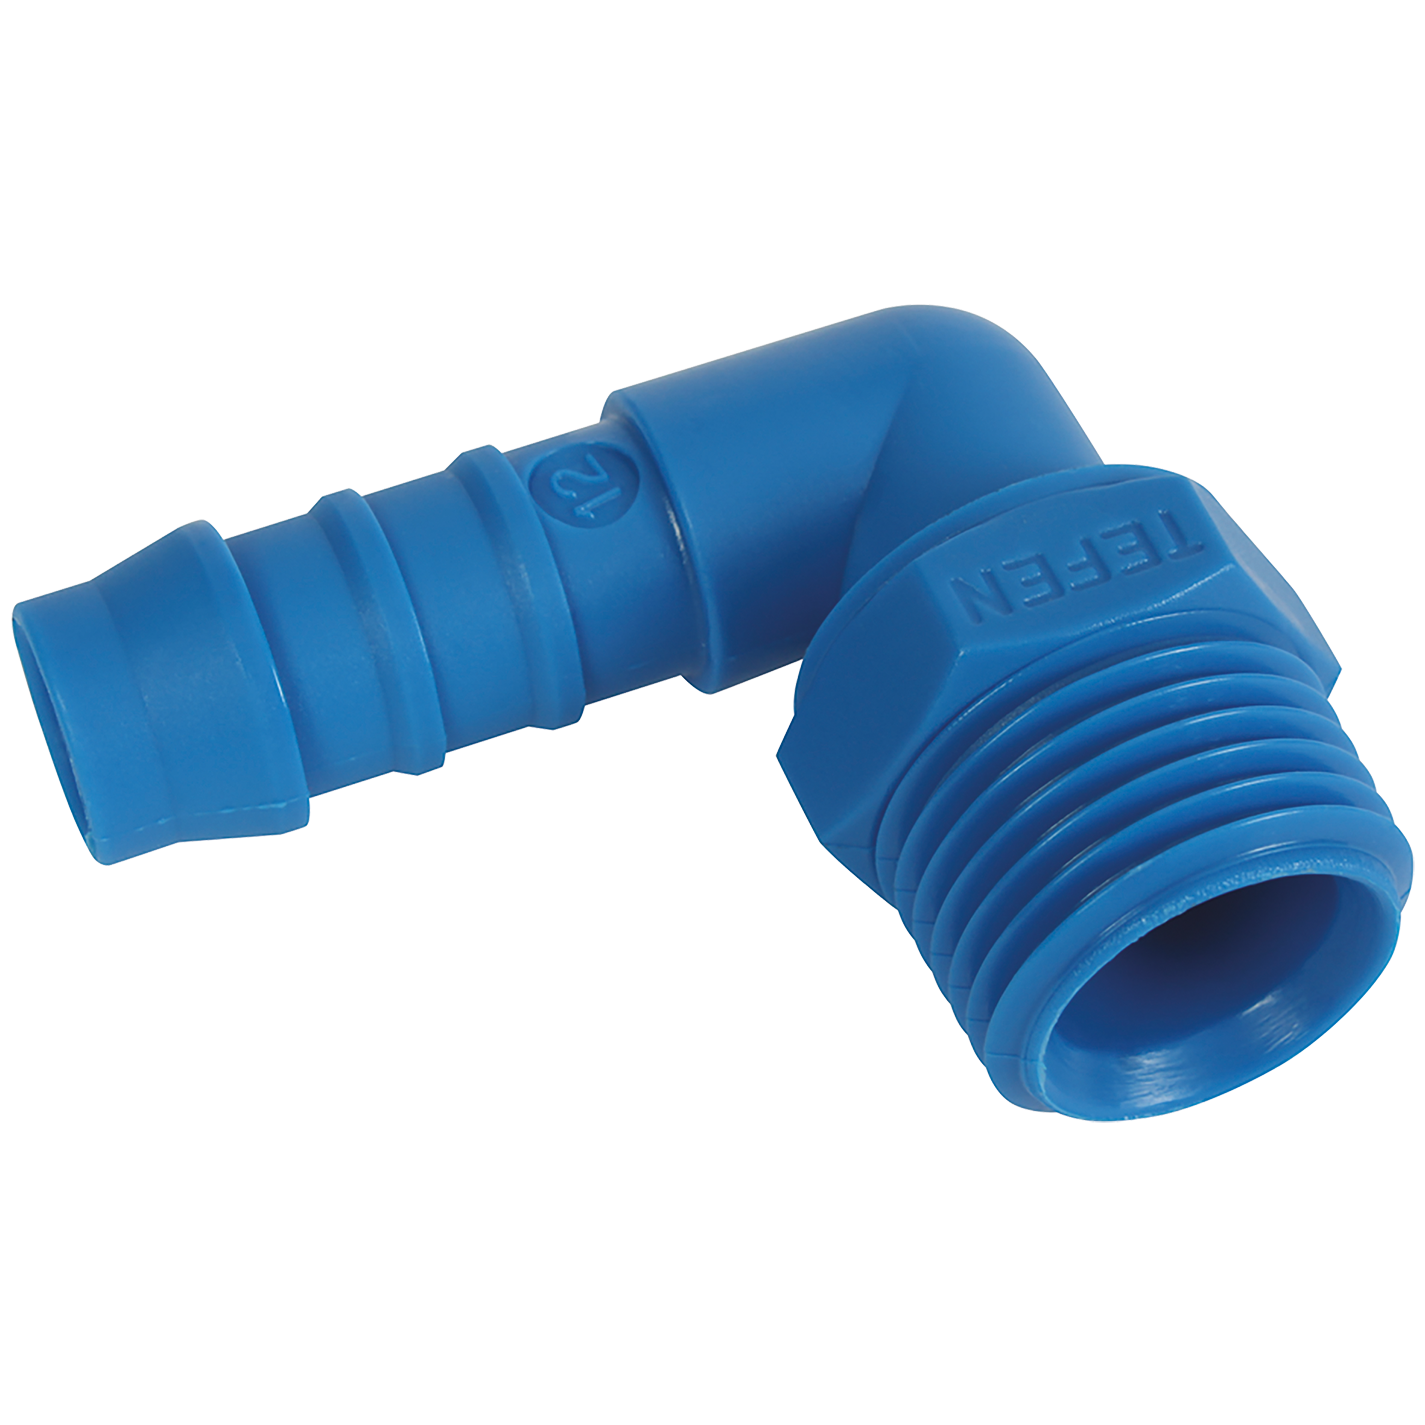 1/4" BSPT Male Elbow Hose Connector